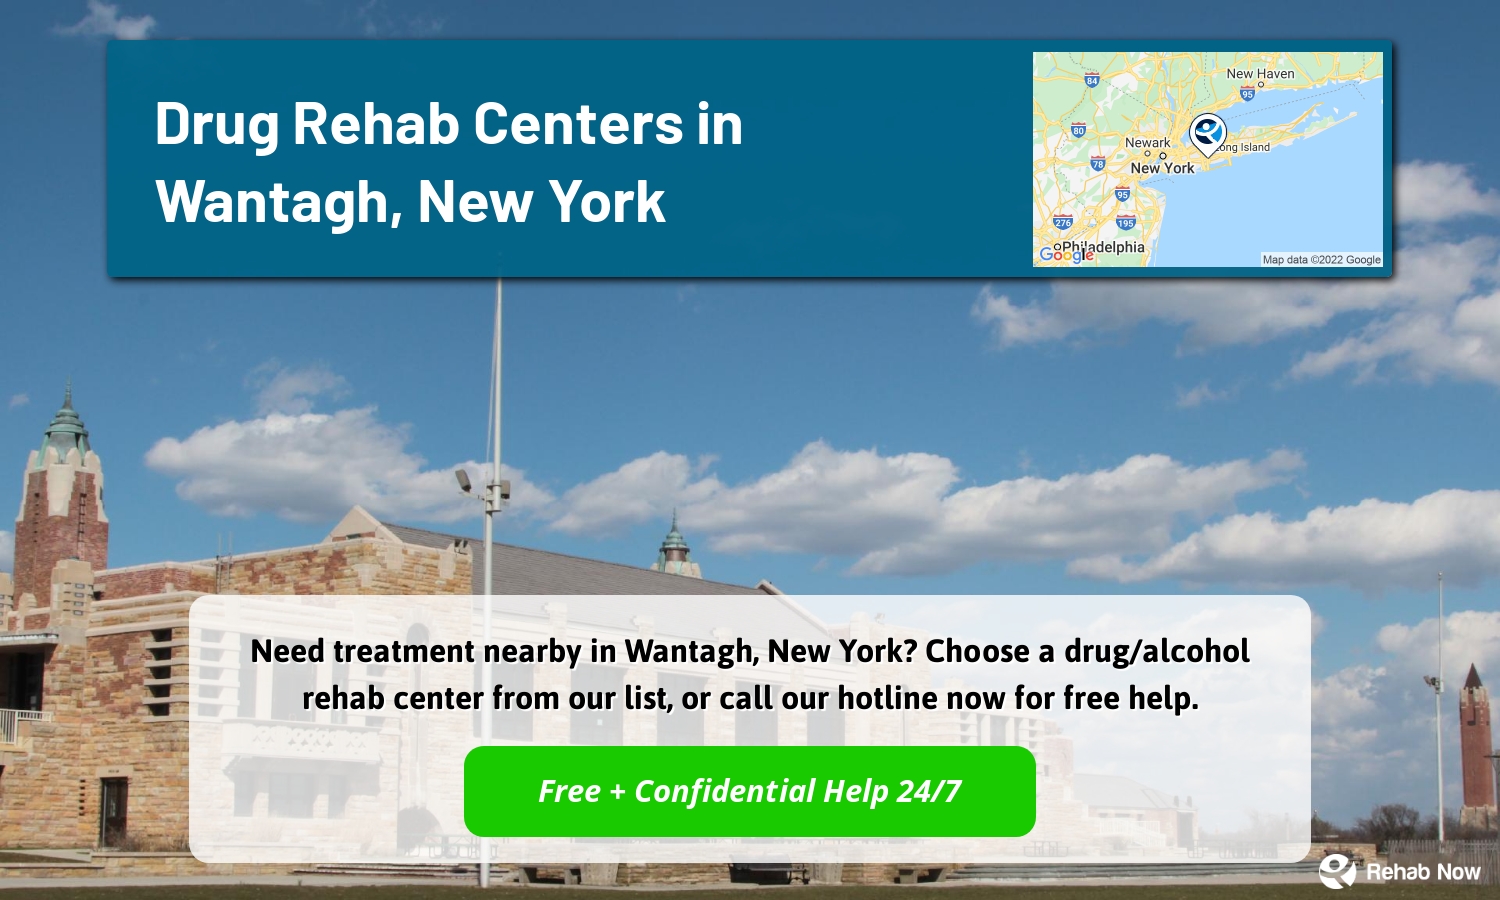 Need treatment nearby in Wantagh, New York? Choose a drug/alcohol rehab center from our list, or call our hotline now for free help.